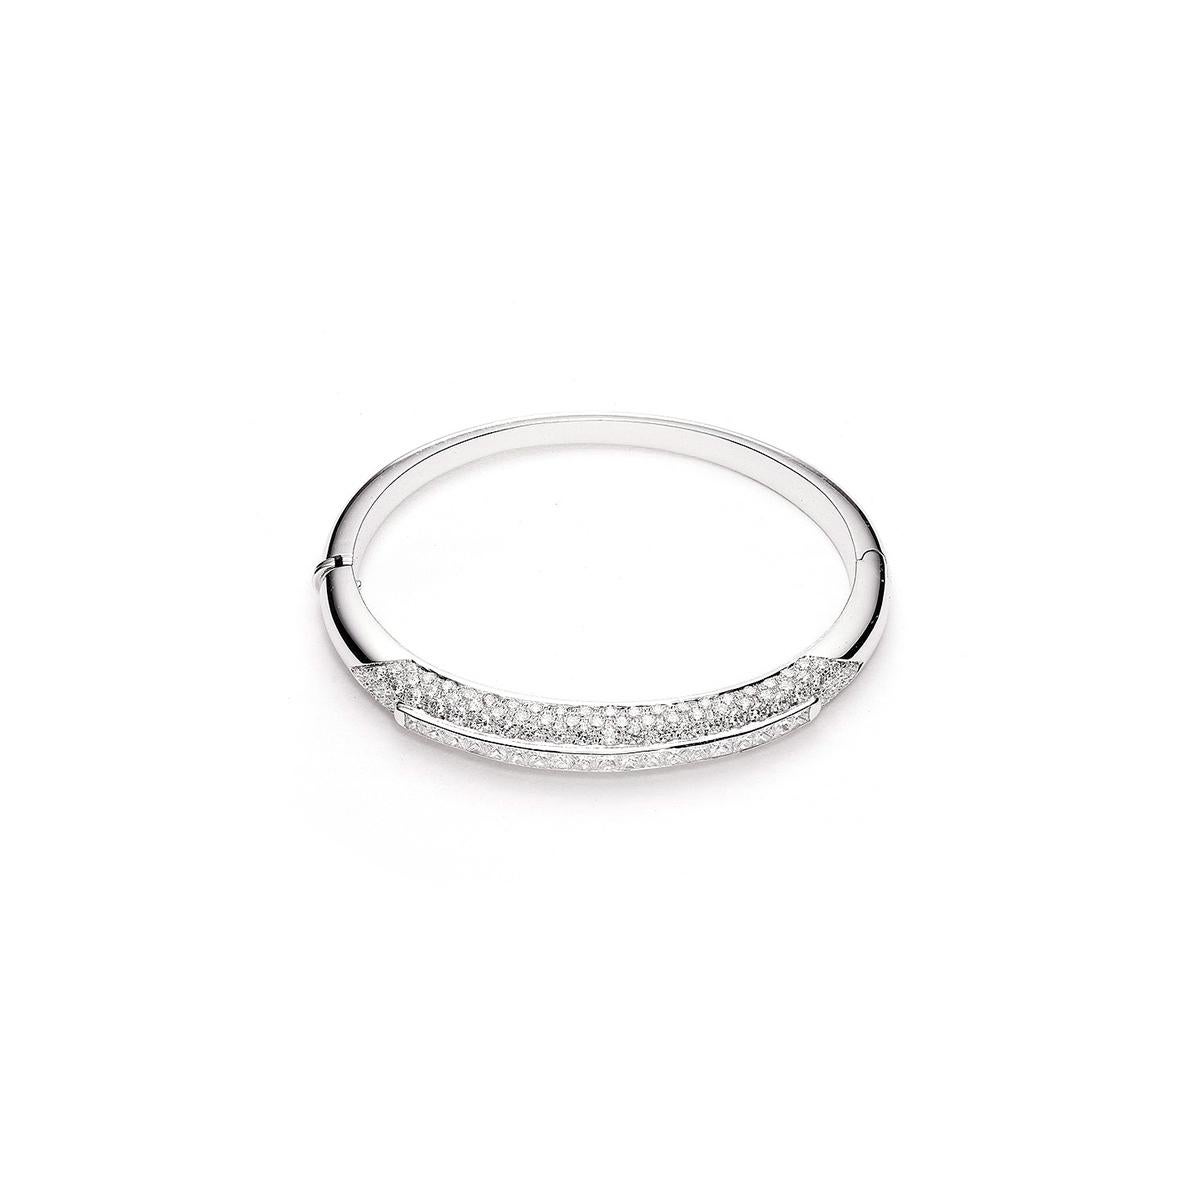 Bangle in 18kt white gold set with 19 princess cut diamonds 1.90 cts and 134 diamonds 2.70 cts

Inner circumference: Approximately 16.64 centimeters ( 6.55 inches)

Total weight: 23.17 grams.

Width on the top: 0.6 centimeters ( 0.24 inches).